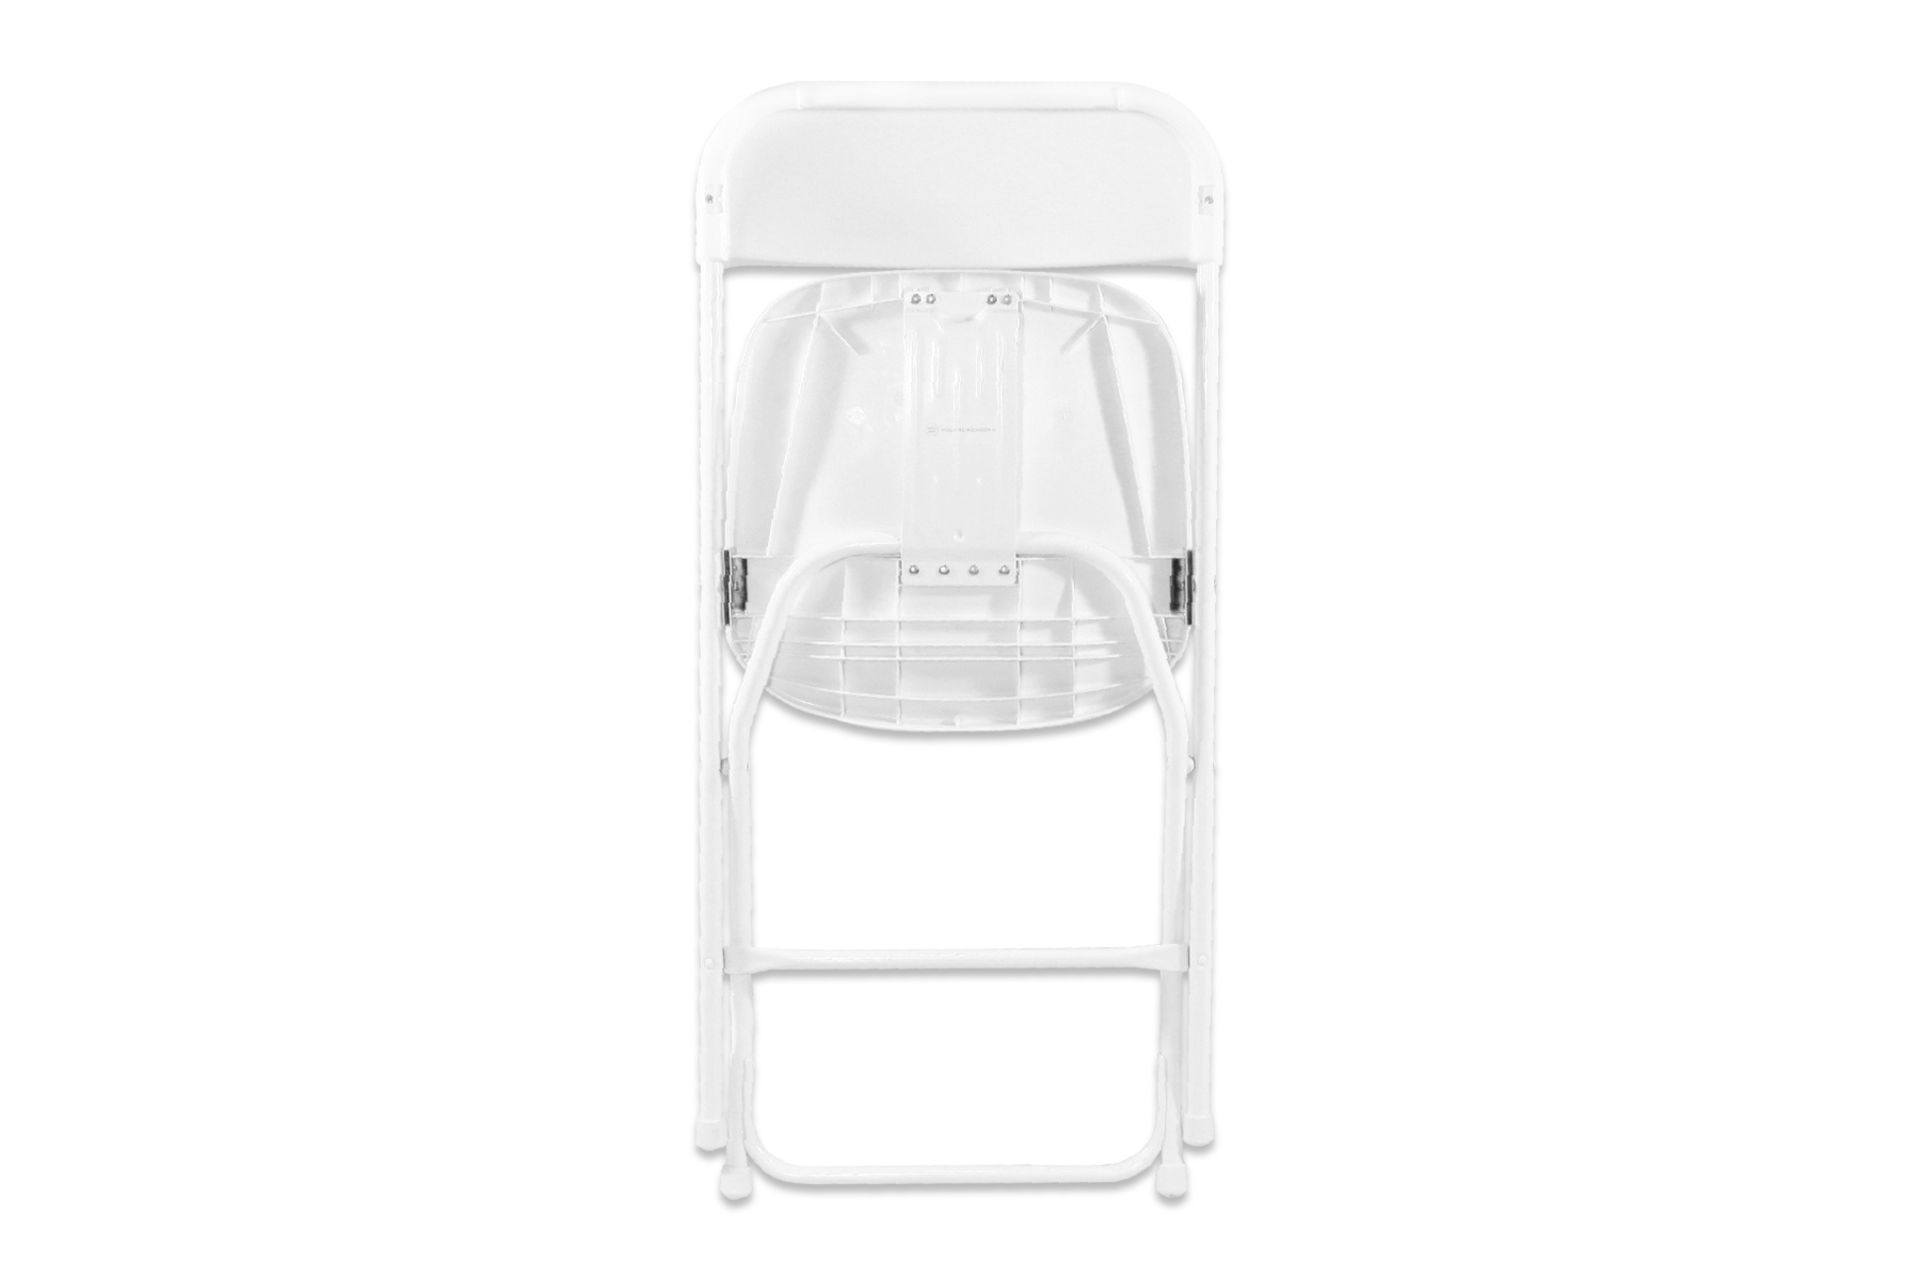 V *TRADE QTY* Grade A Folding Plastic Chair - White X150 YOUR BID PRICE TO BE MULTIPLIED BY ONE - Image 4 of 6